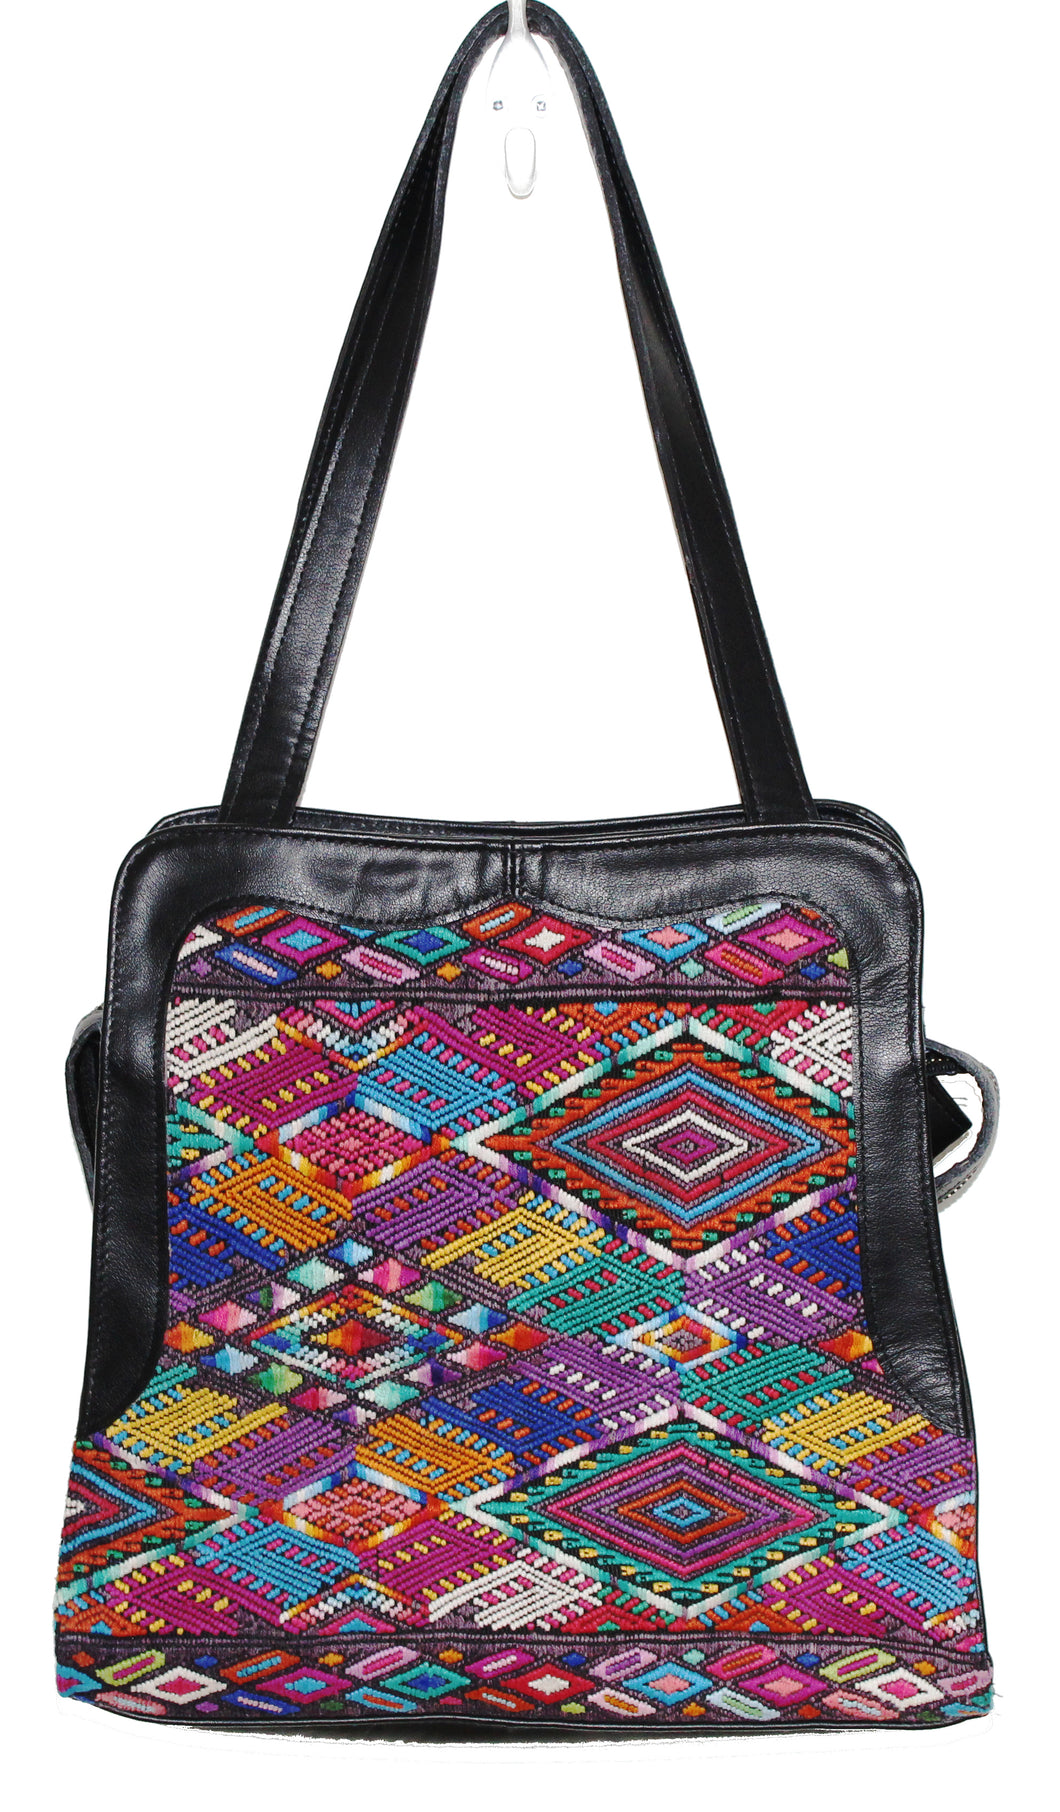 MoonLake Bags Ethical Fashion Brand Linda bag in black leather and handwoven geometric huipil